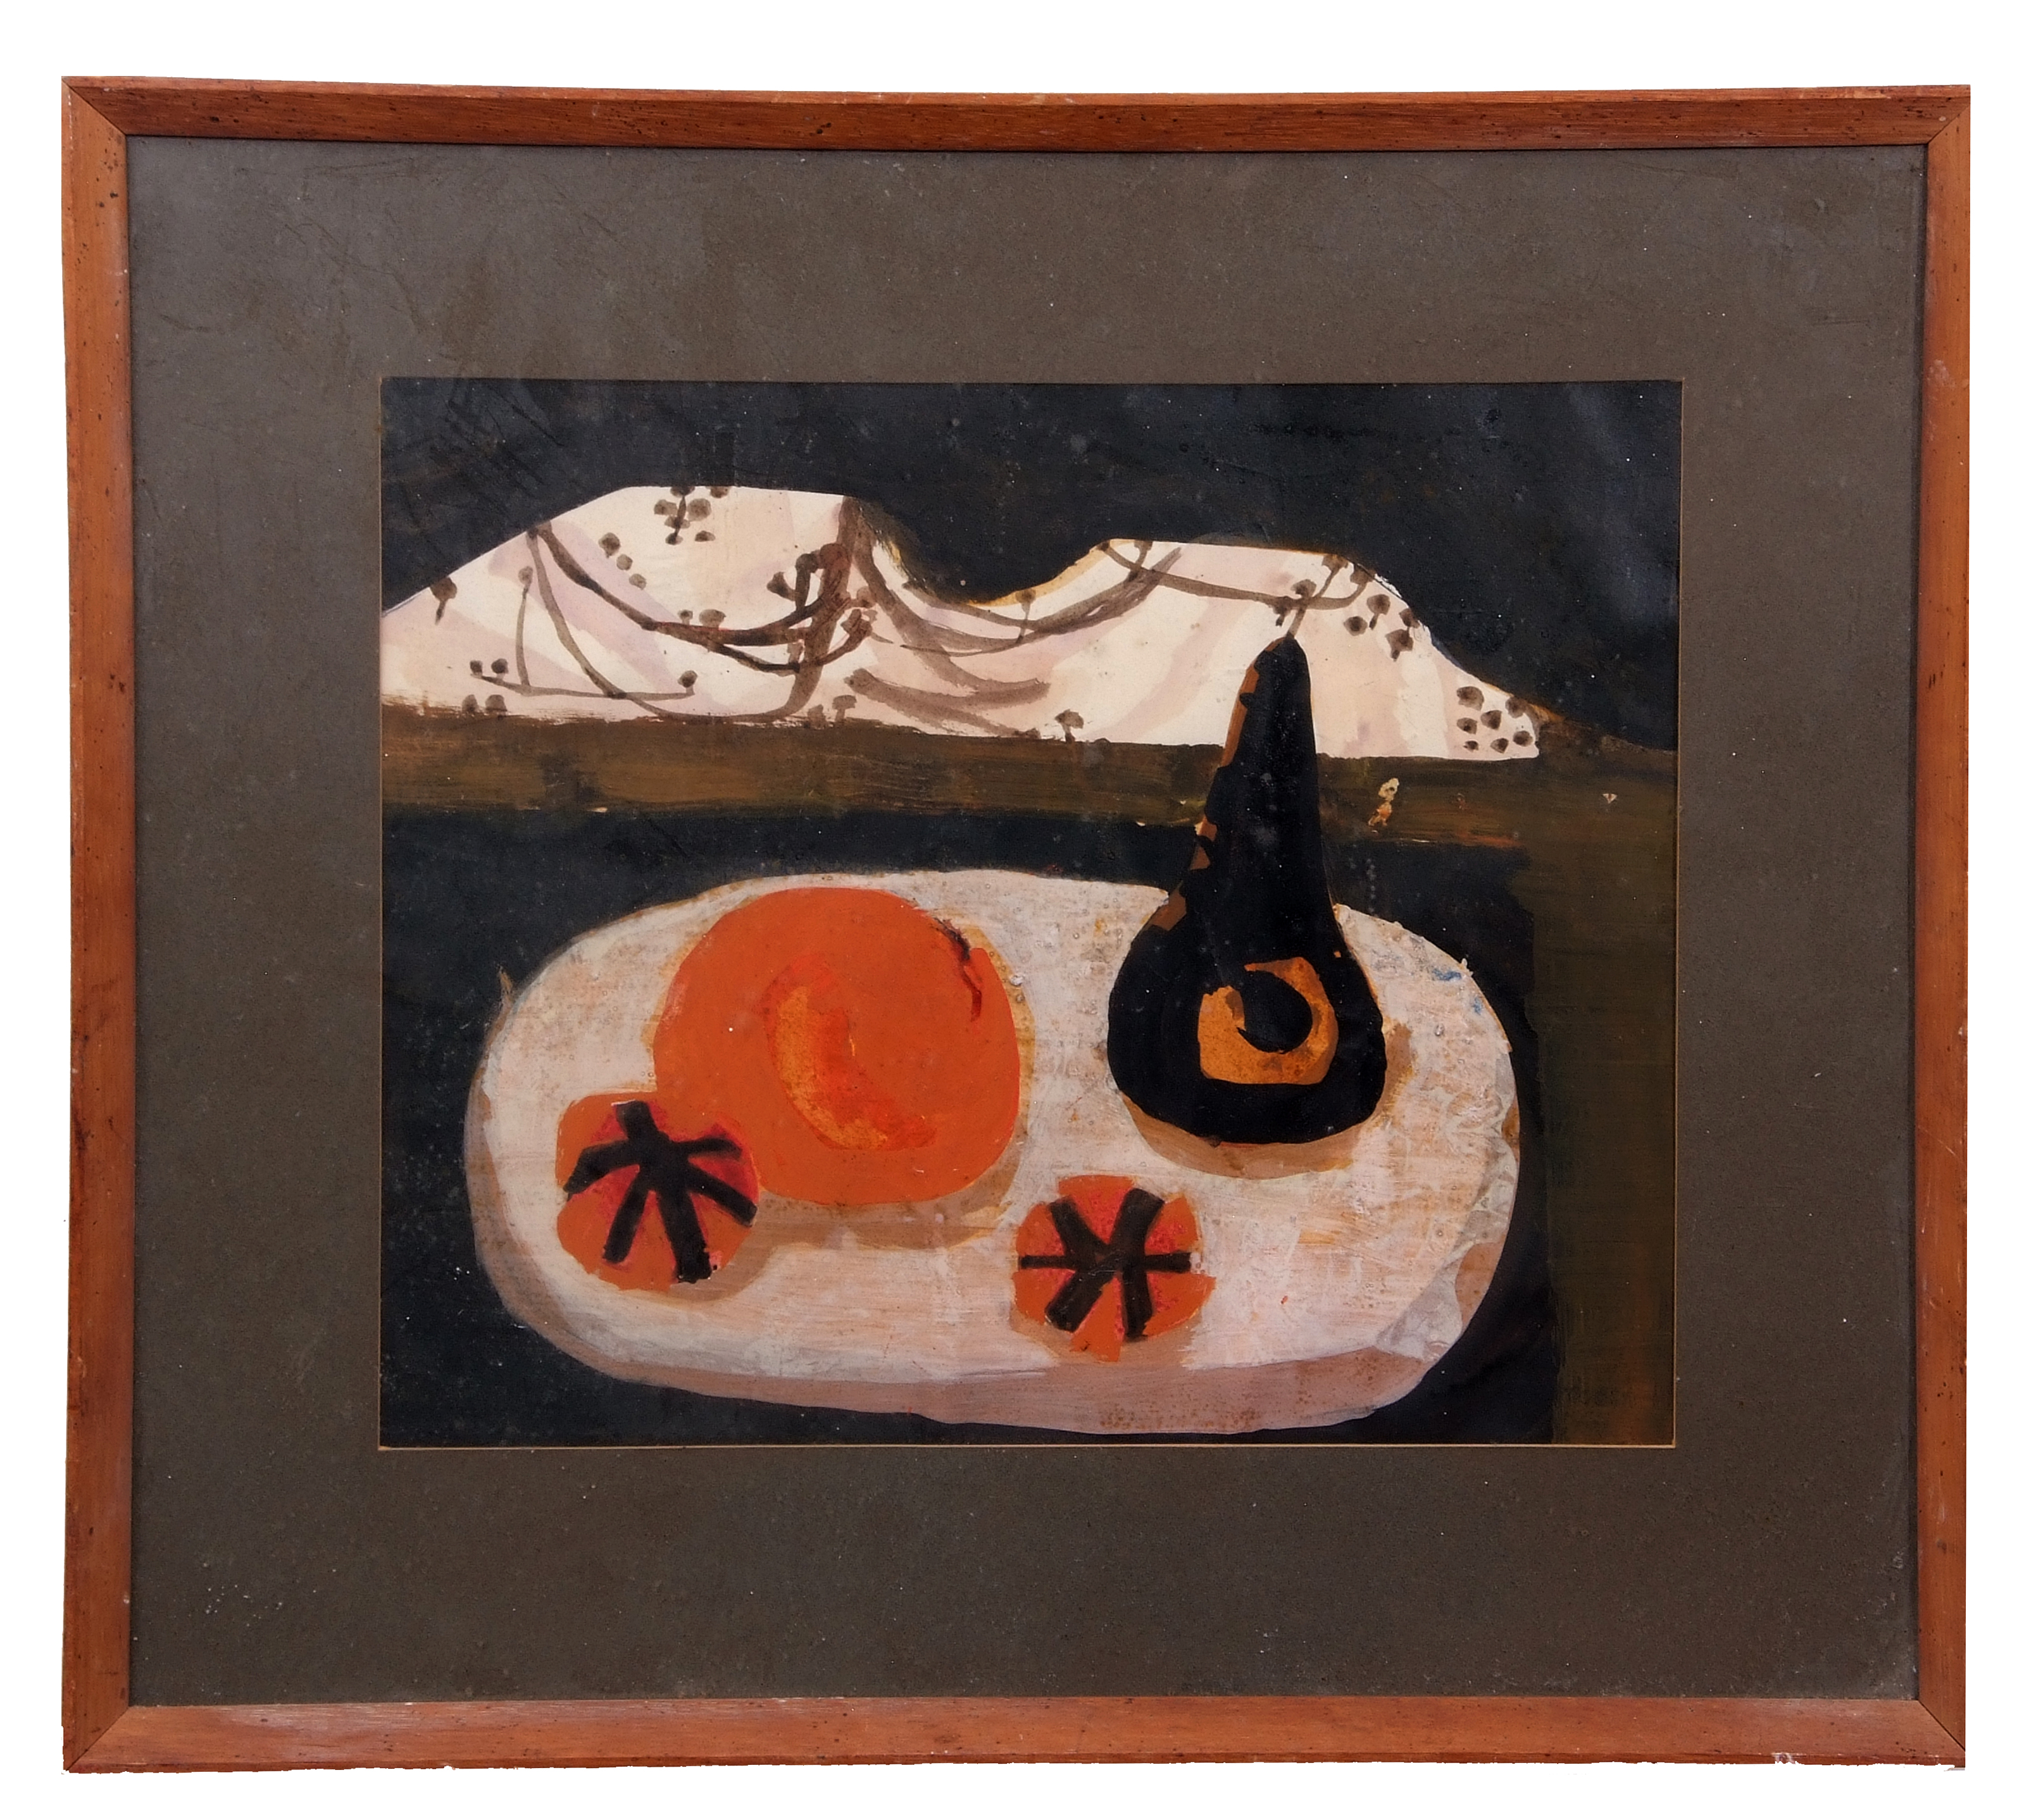 AR Mary Fedden (1915-2012 "White Cliffs" watercolour and gouache, signed and dated 67 lower right 28 - Image 2 of 2